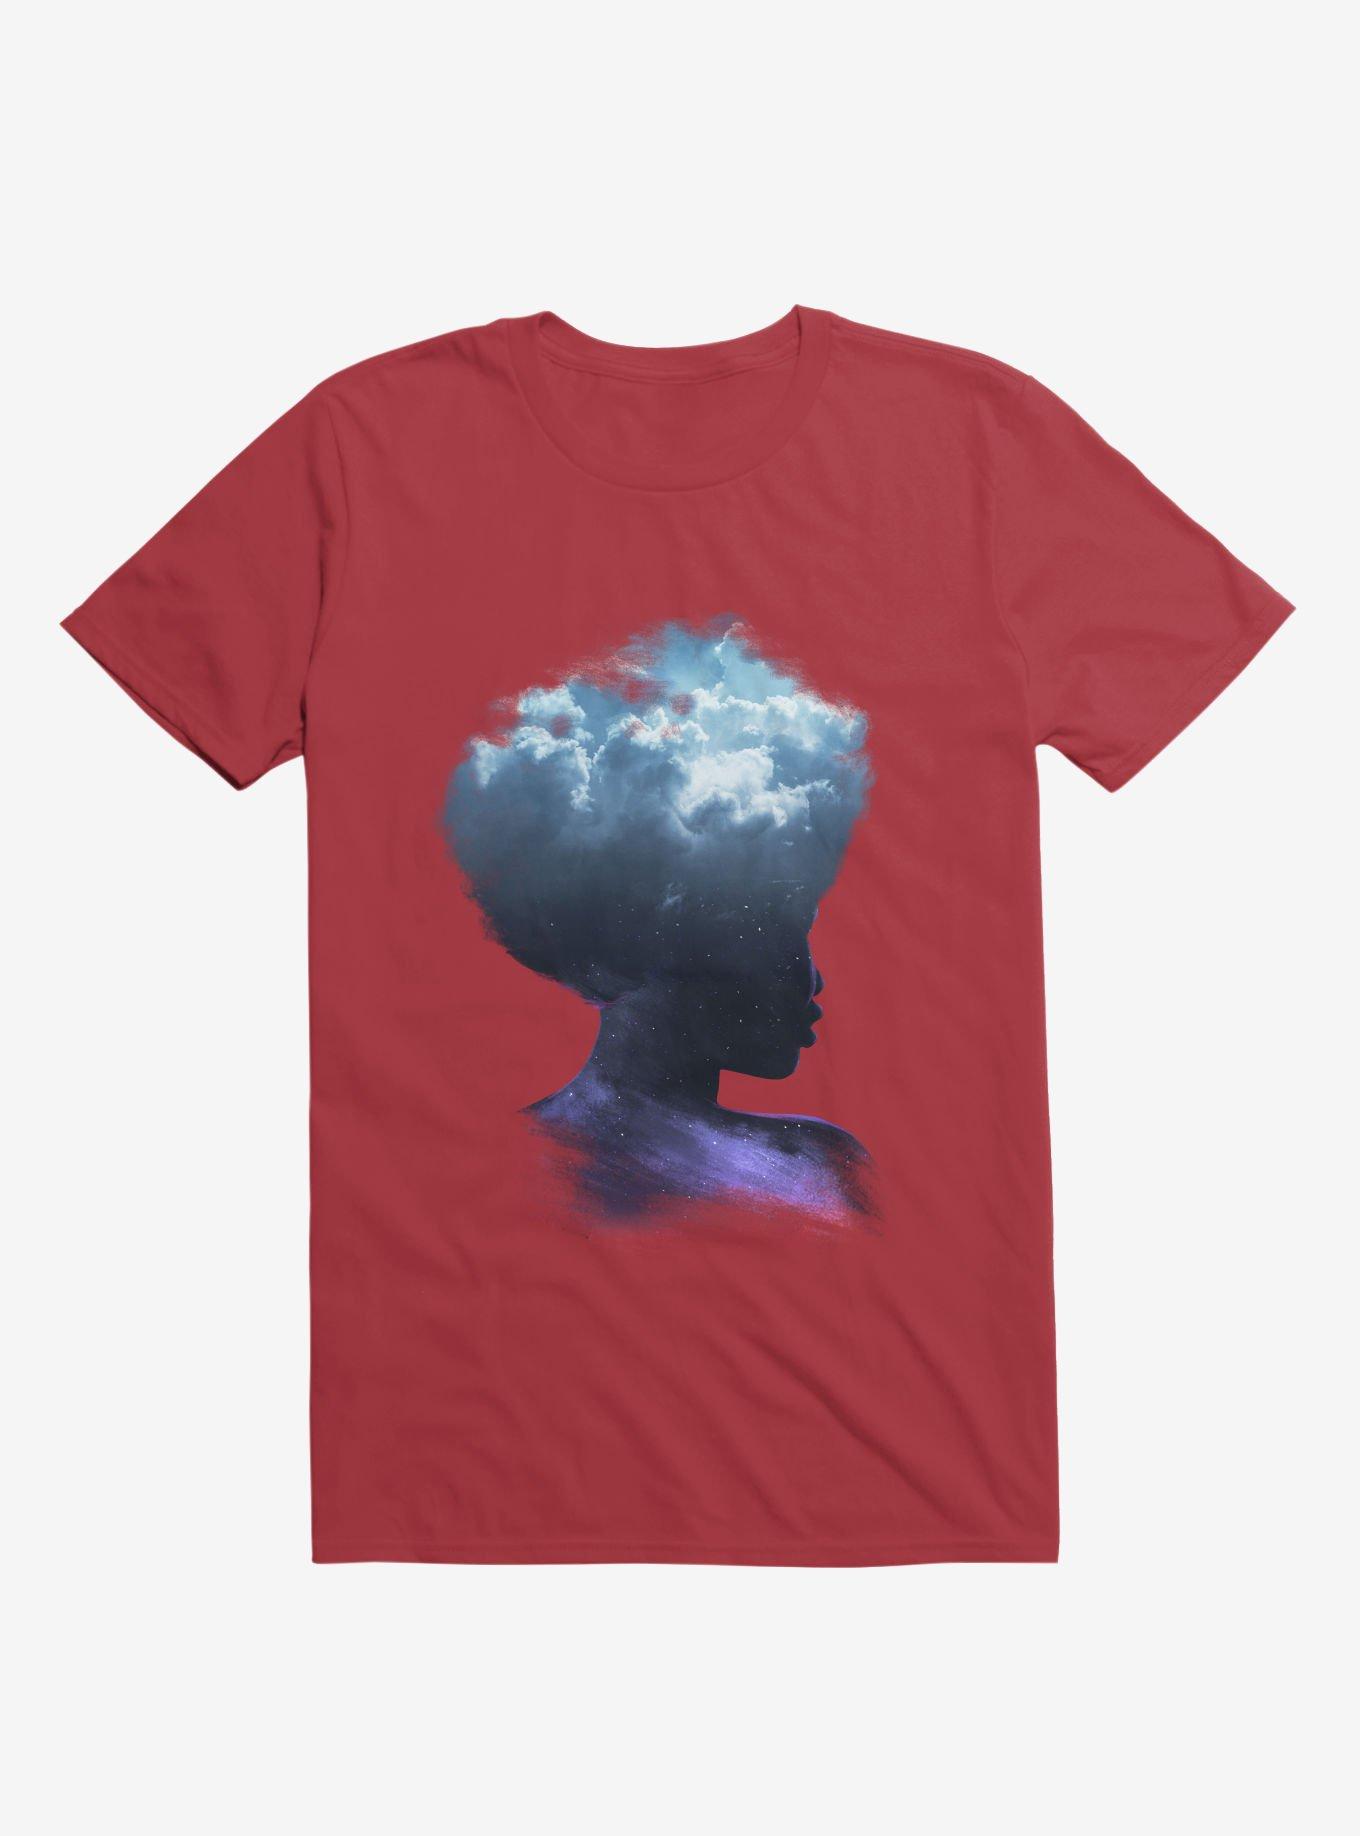 Head The Clouds Galaxy Red T-Shirt